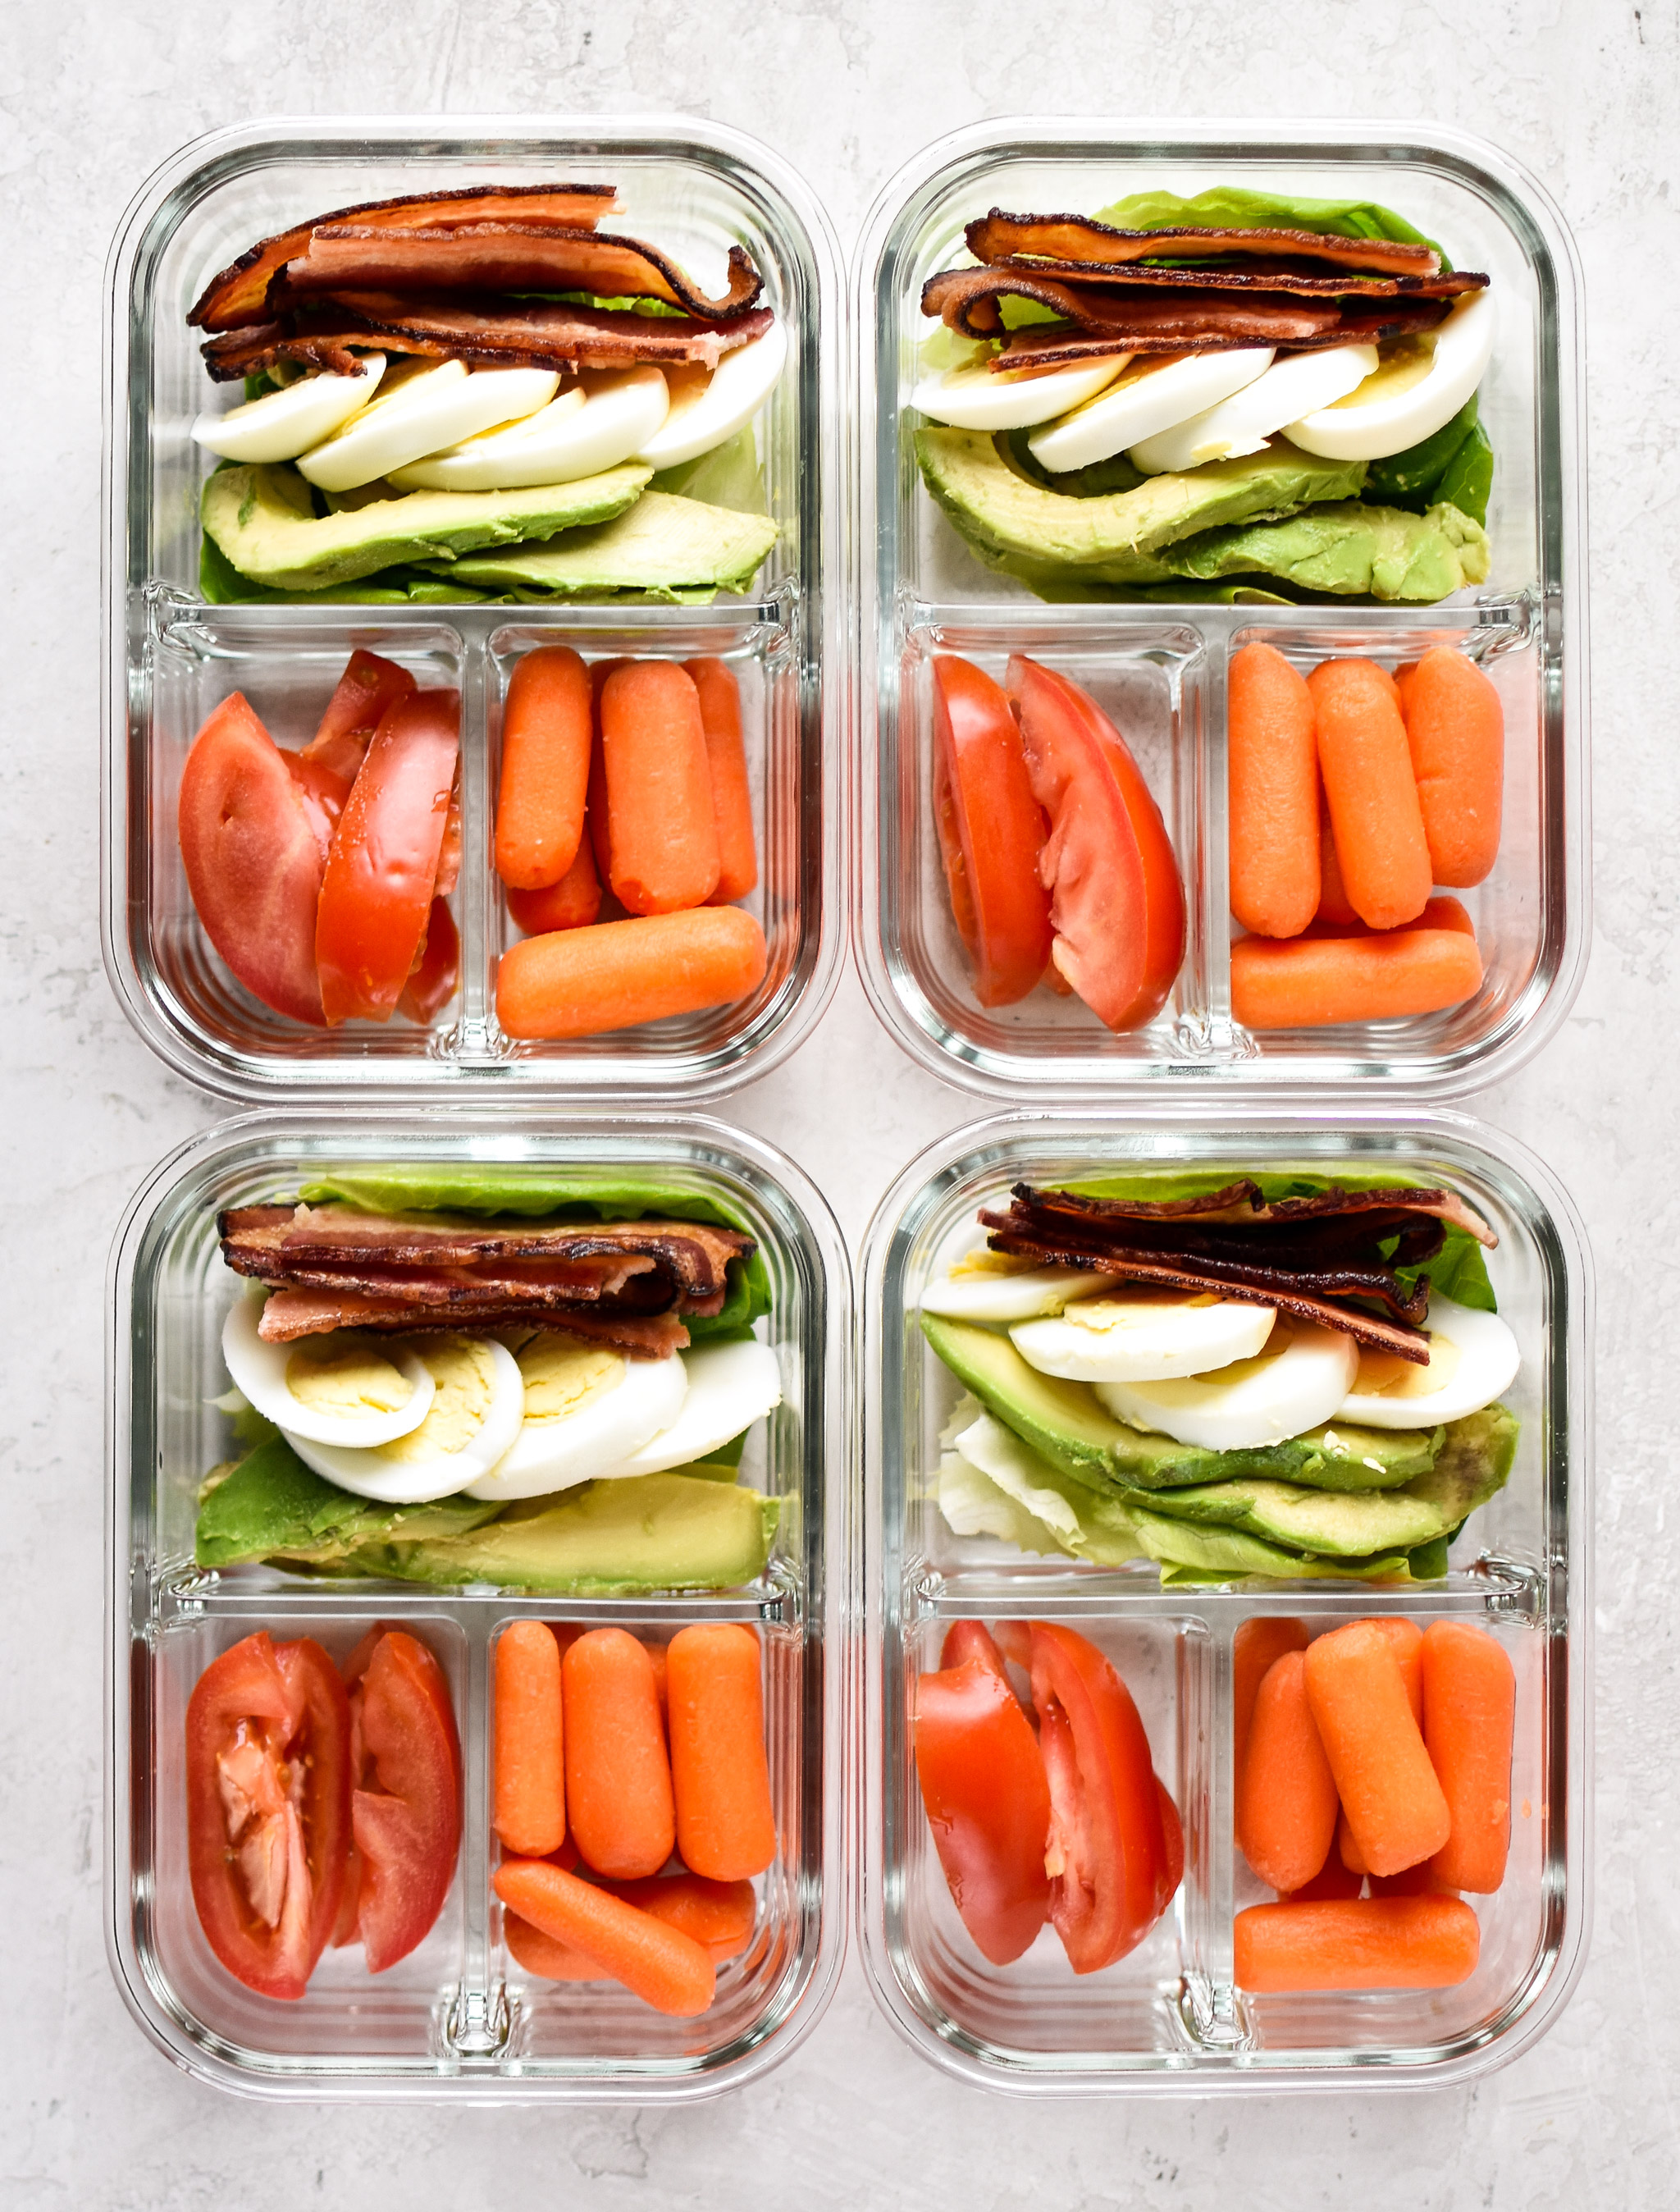 BLTA Lettuce Wraps Meal Prep pictured in 4 meal prep containers from above with baby carrots.